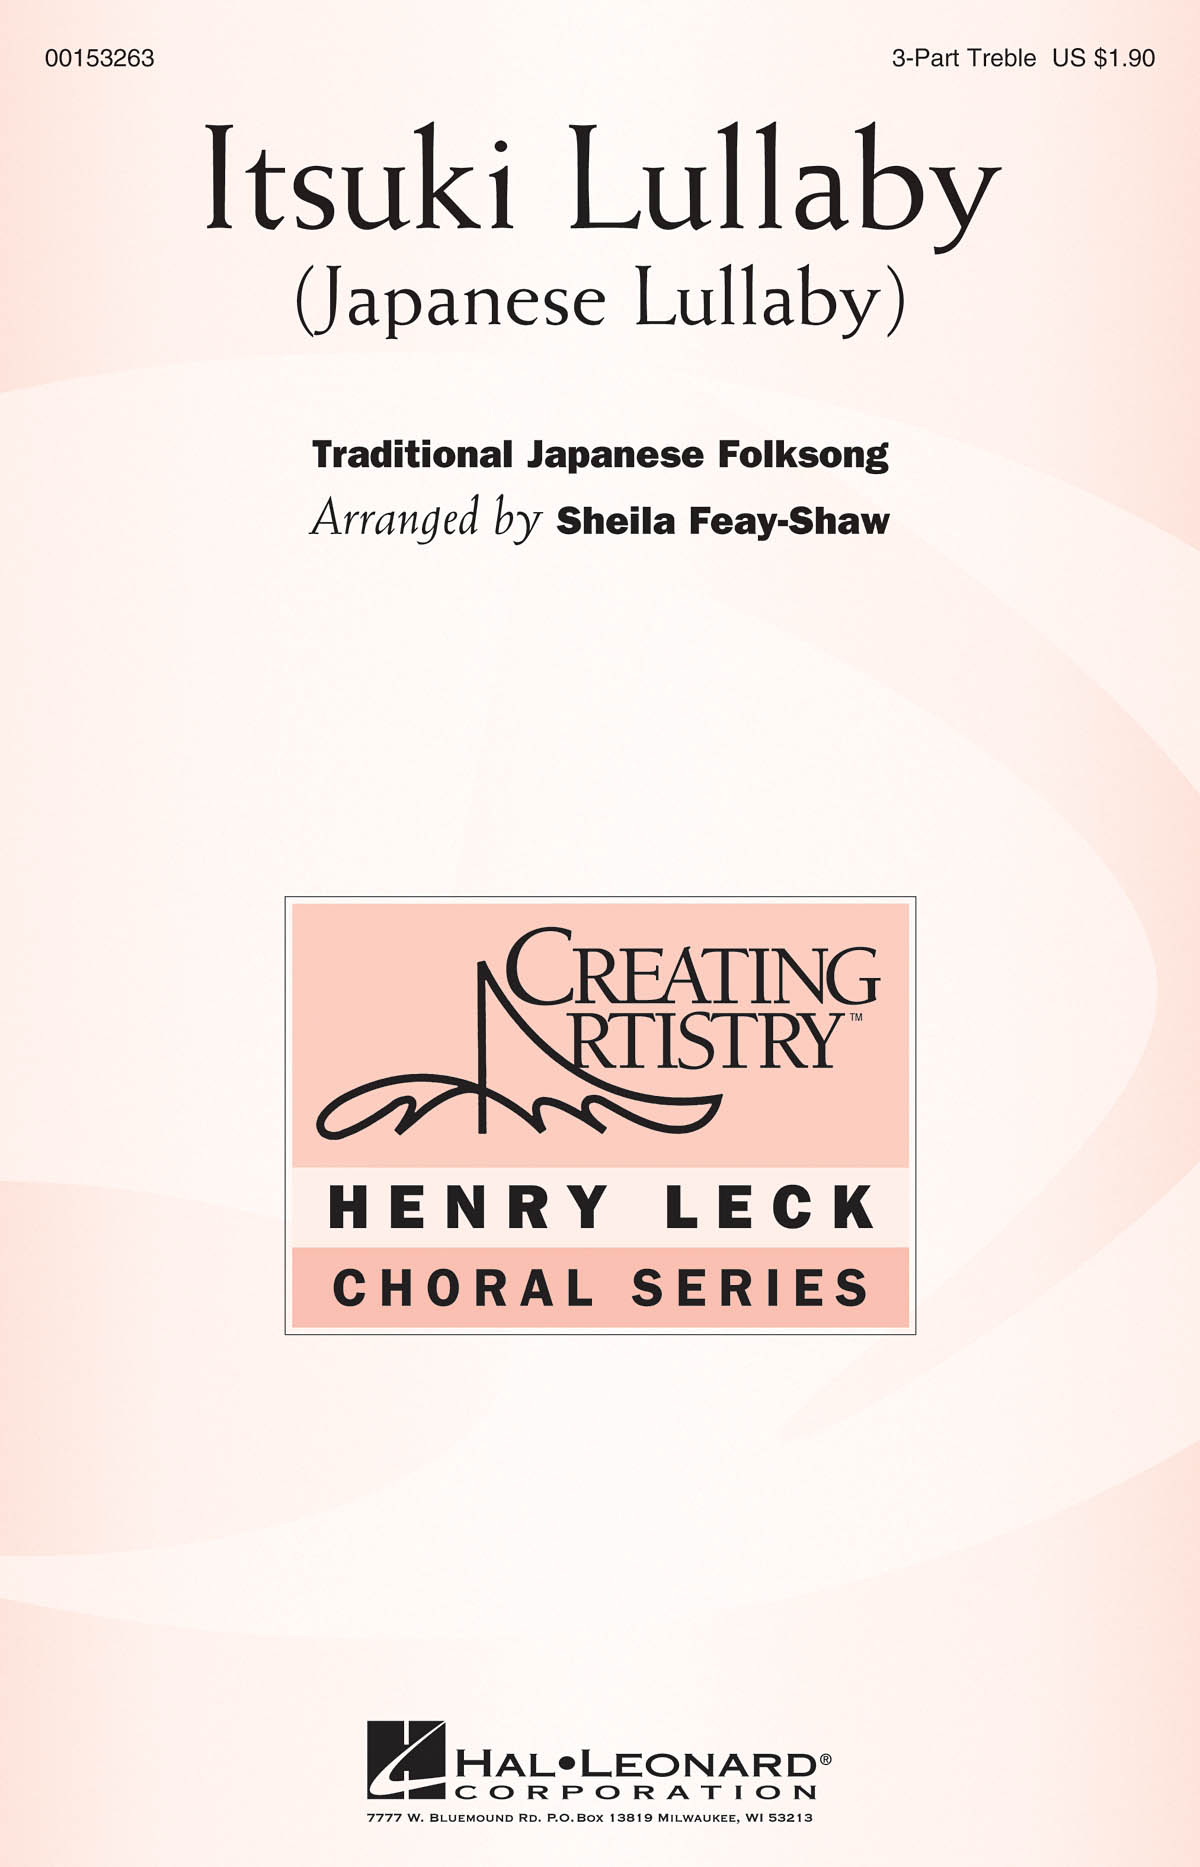 Itsuki Lullaby: Upper Voices a Cappella: Vocal Score